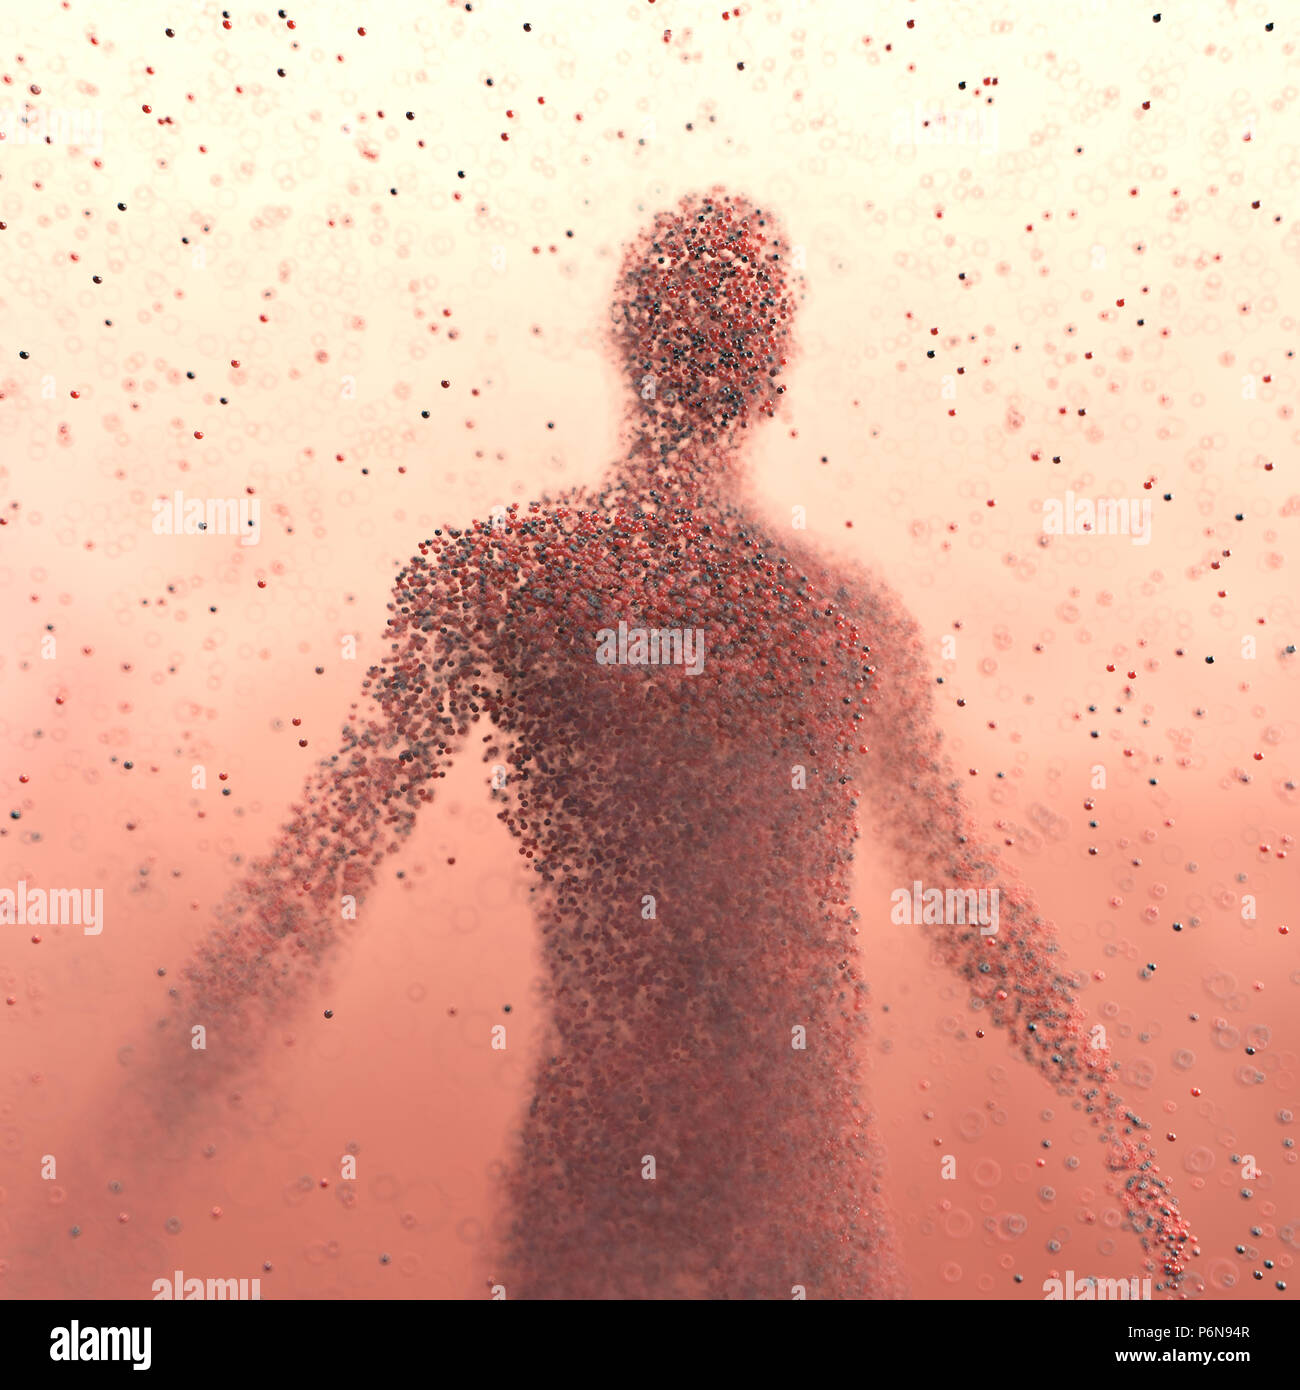 3D illustration. Human body shaped with colored molecules in a science concept image. Stock Photo